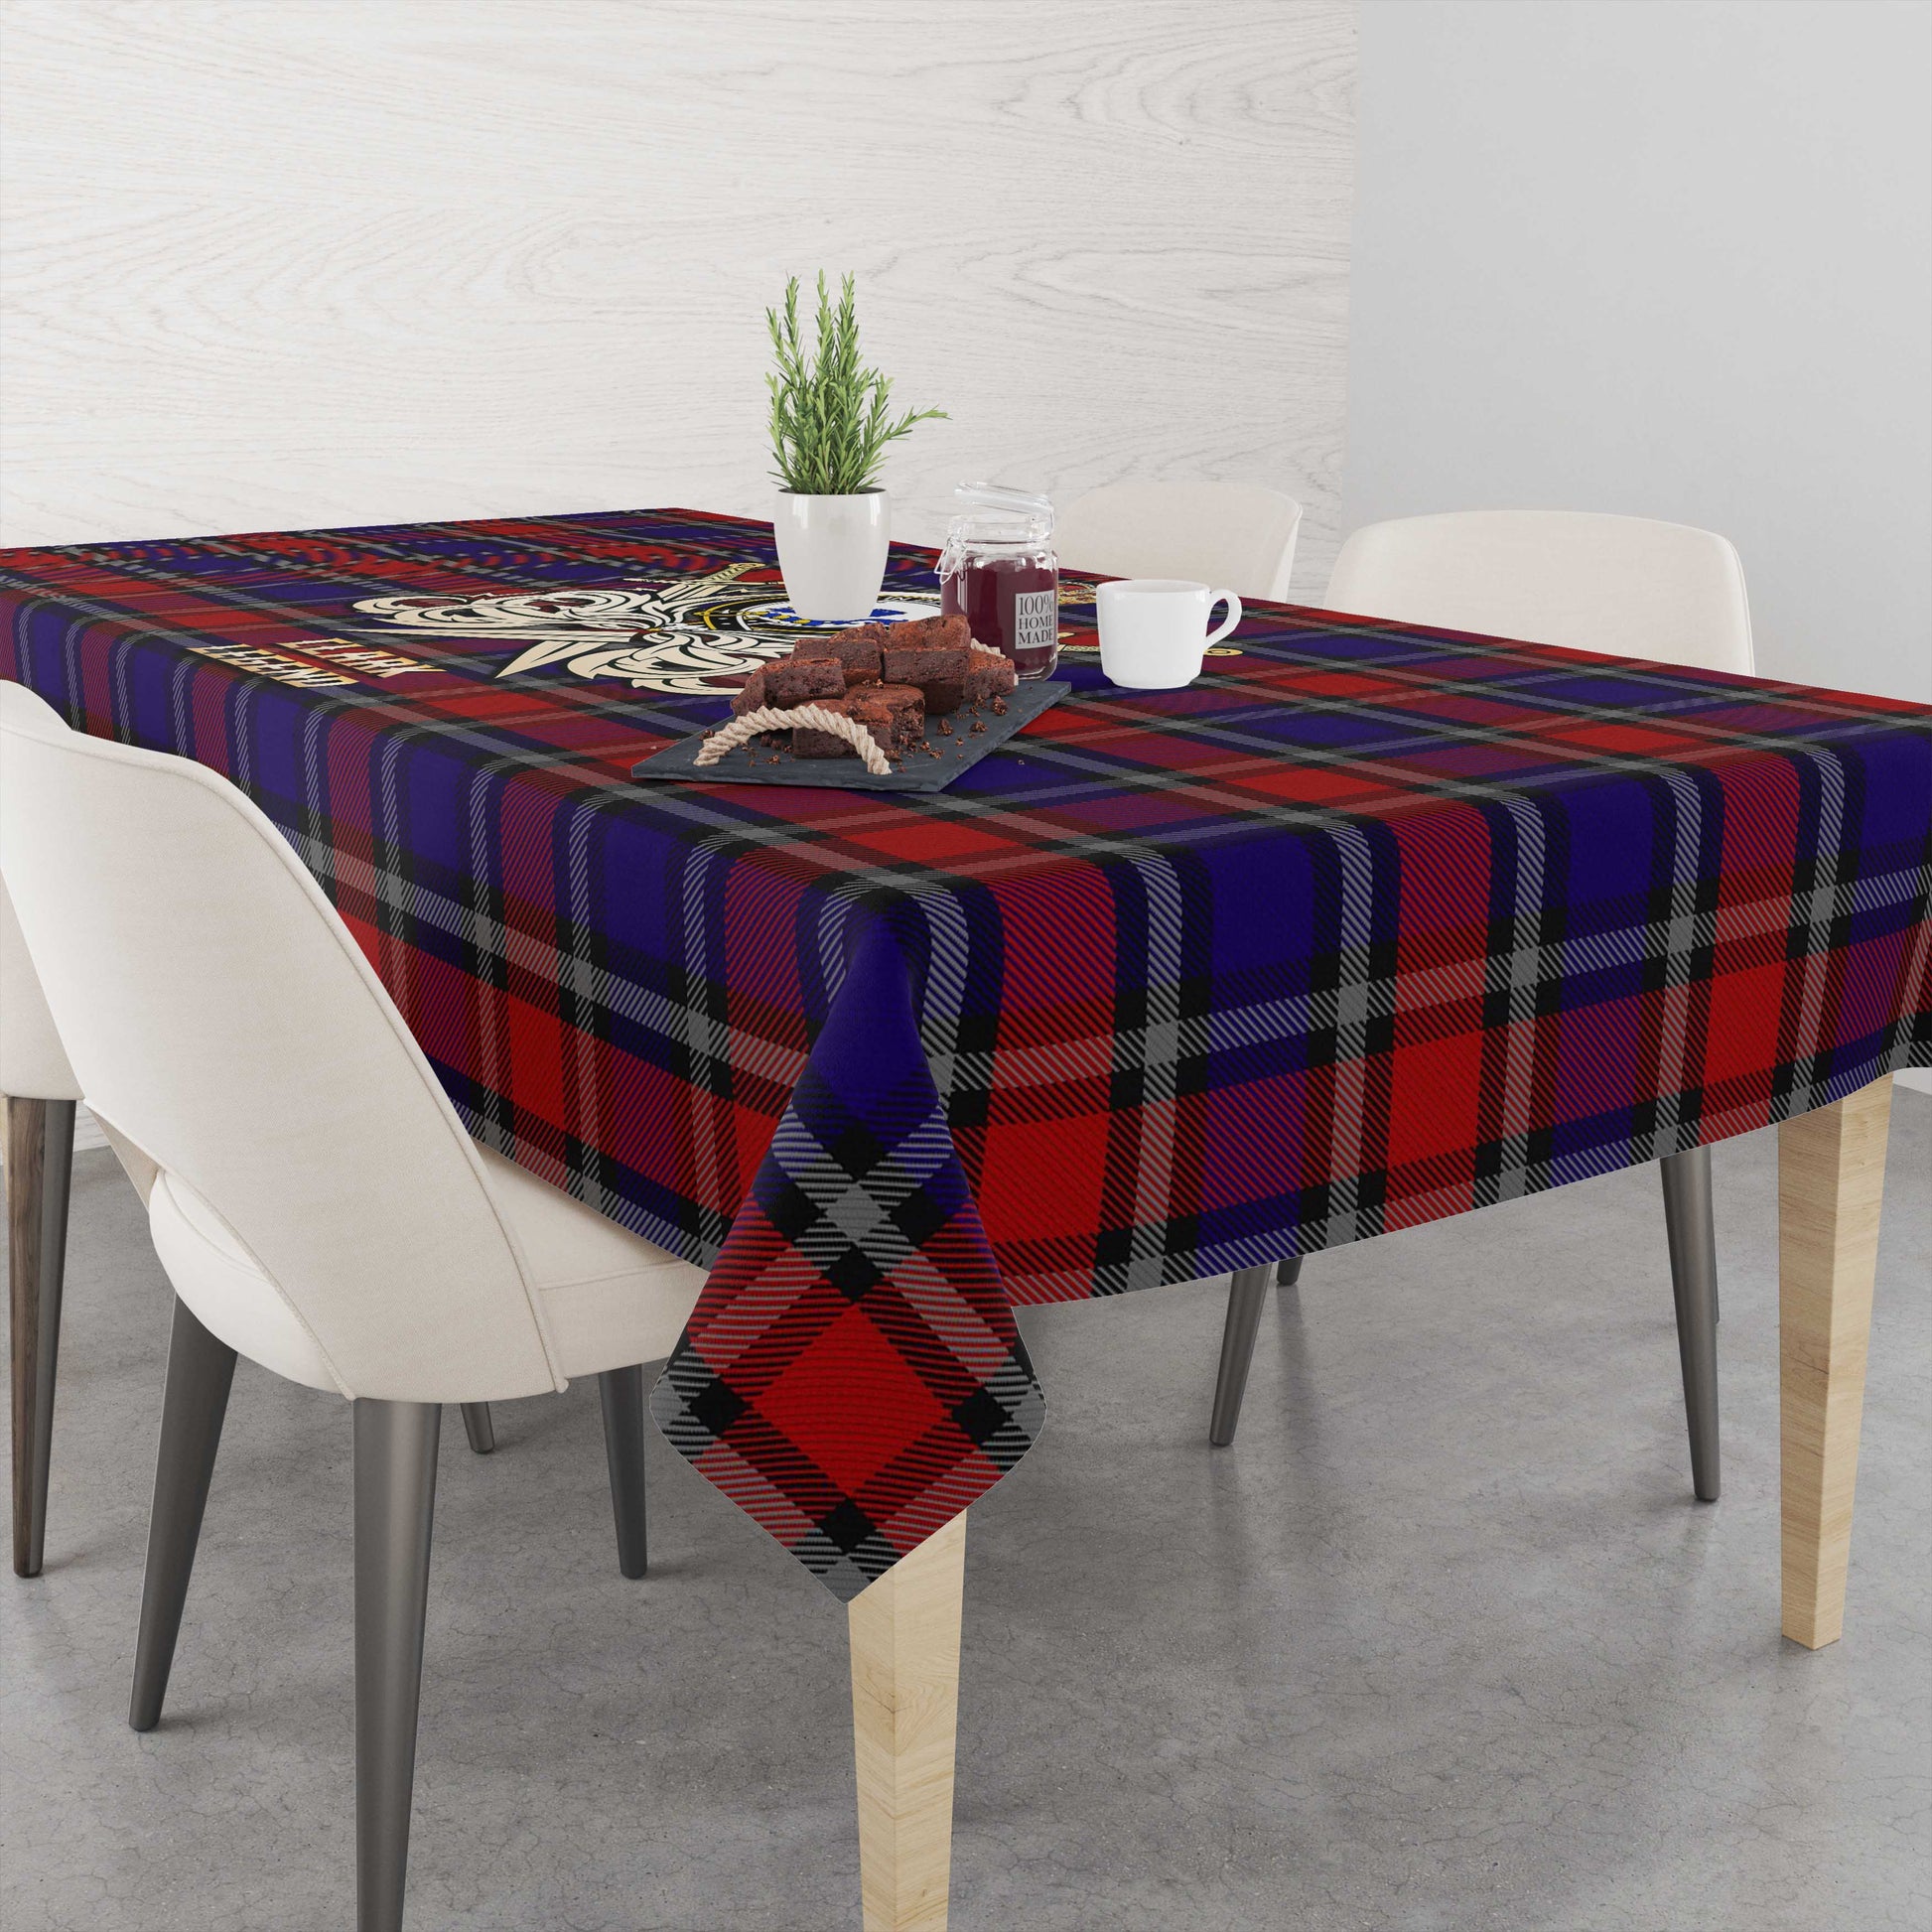 Tartan Vibes Clothing Clark (Lion) Red Tartan Tablecloth with Clan Crest and the Golden Sword of Courageous Legacy